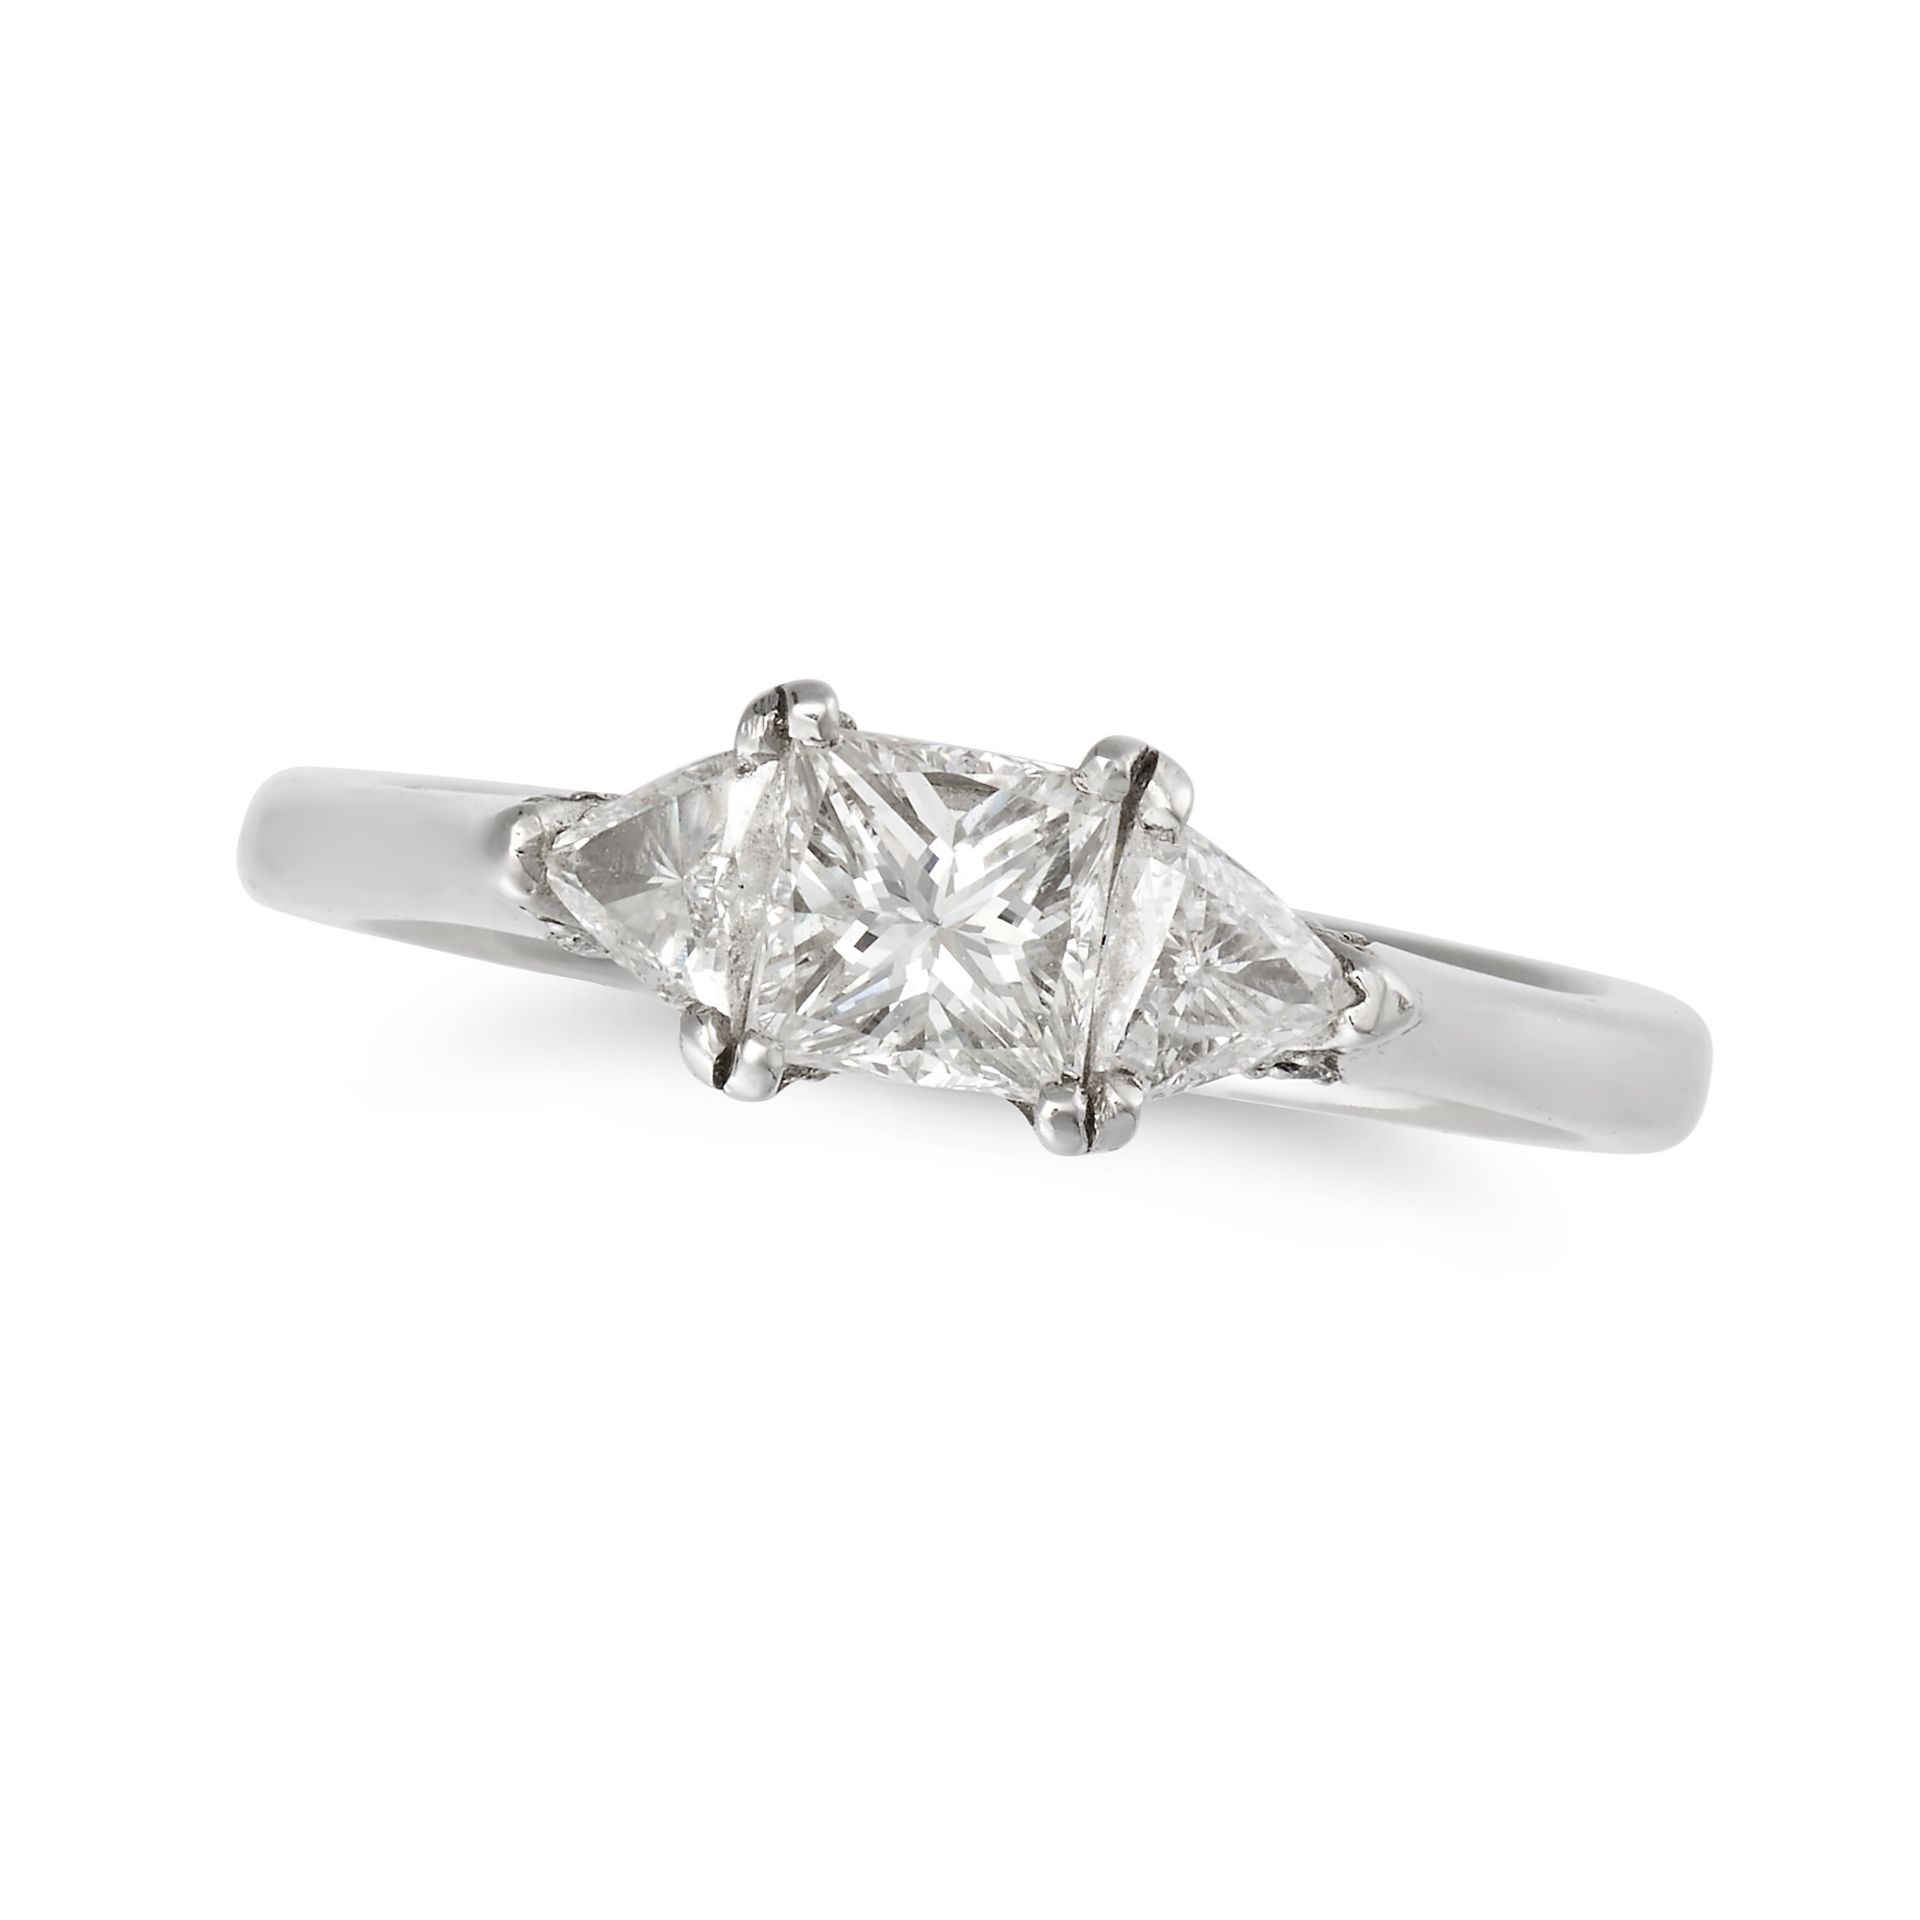 NO RESERVE - A THREE STONE DIAMOND RING in platinum, set with a princess cut diamond accented on ...